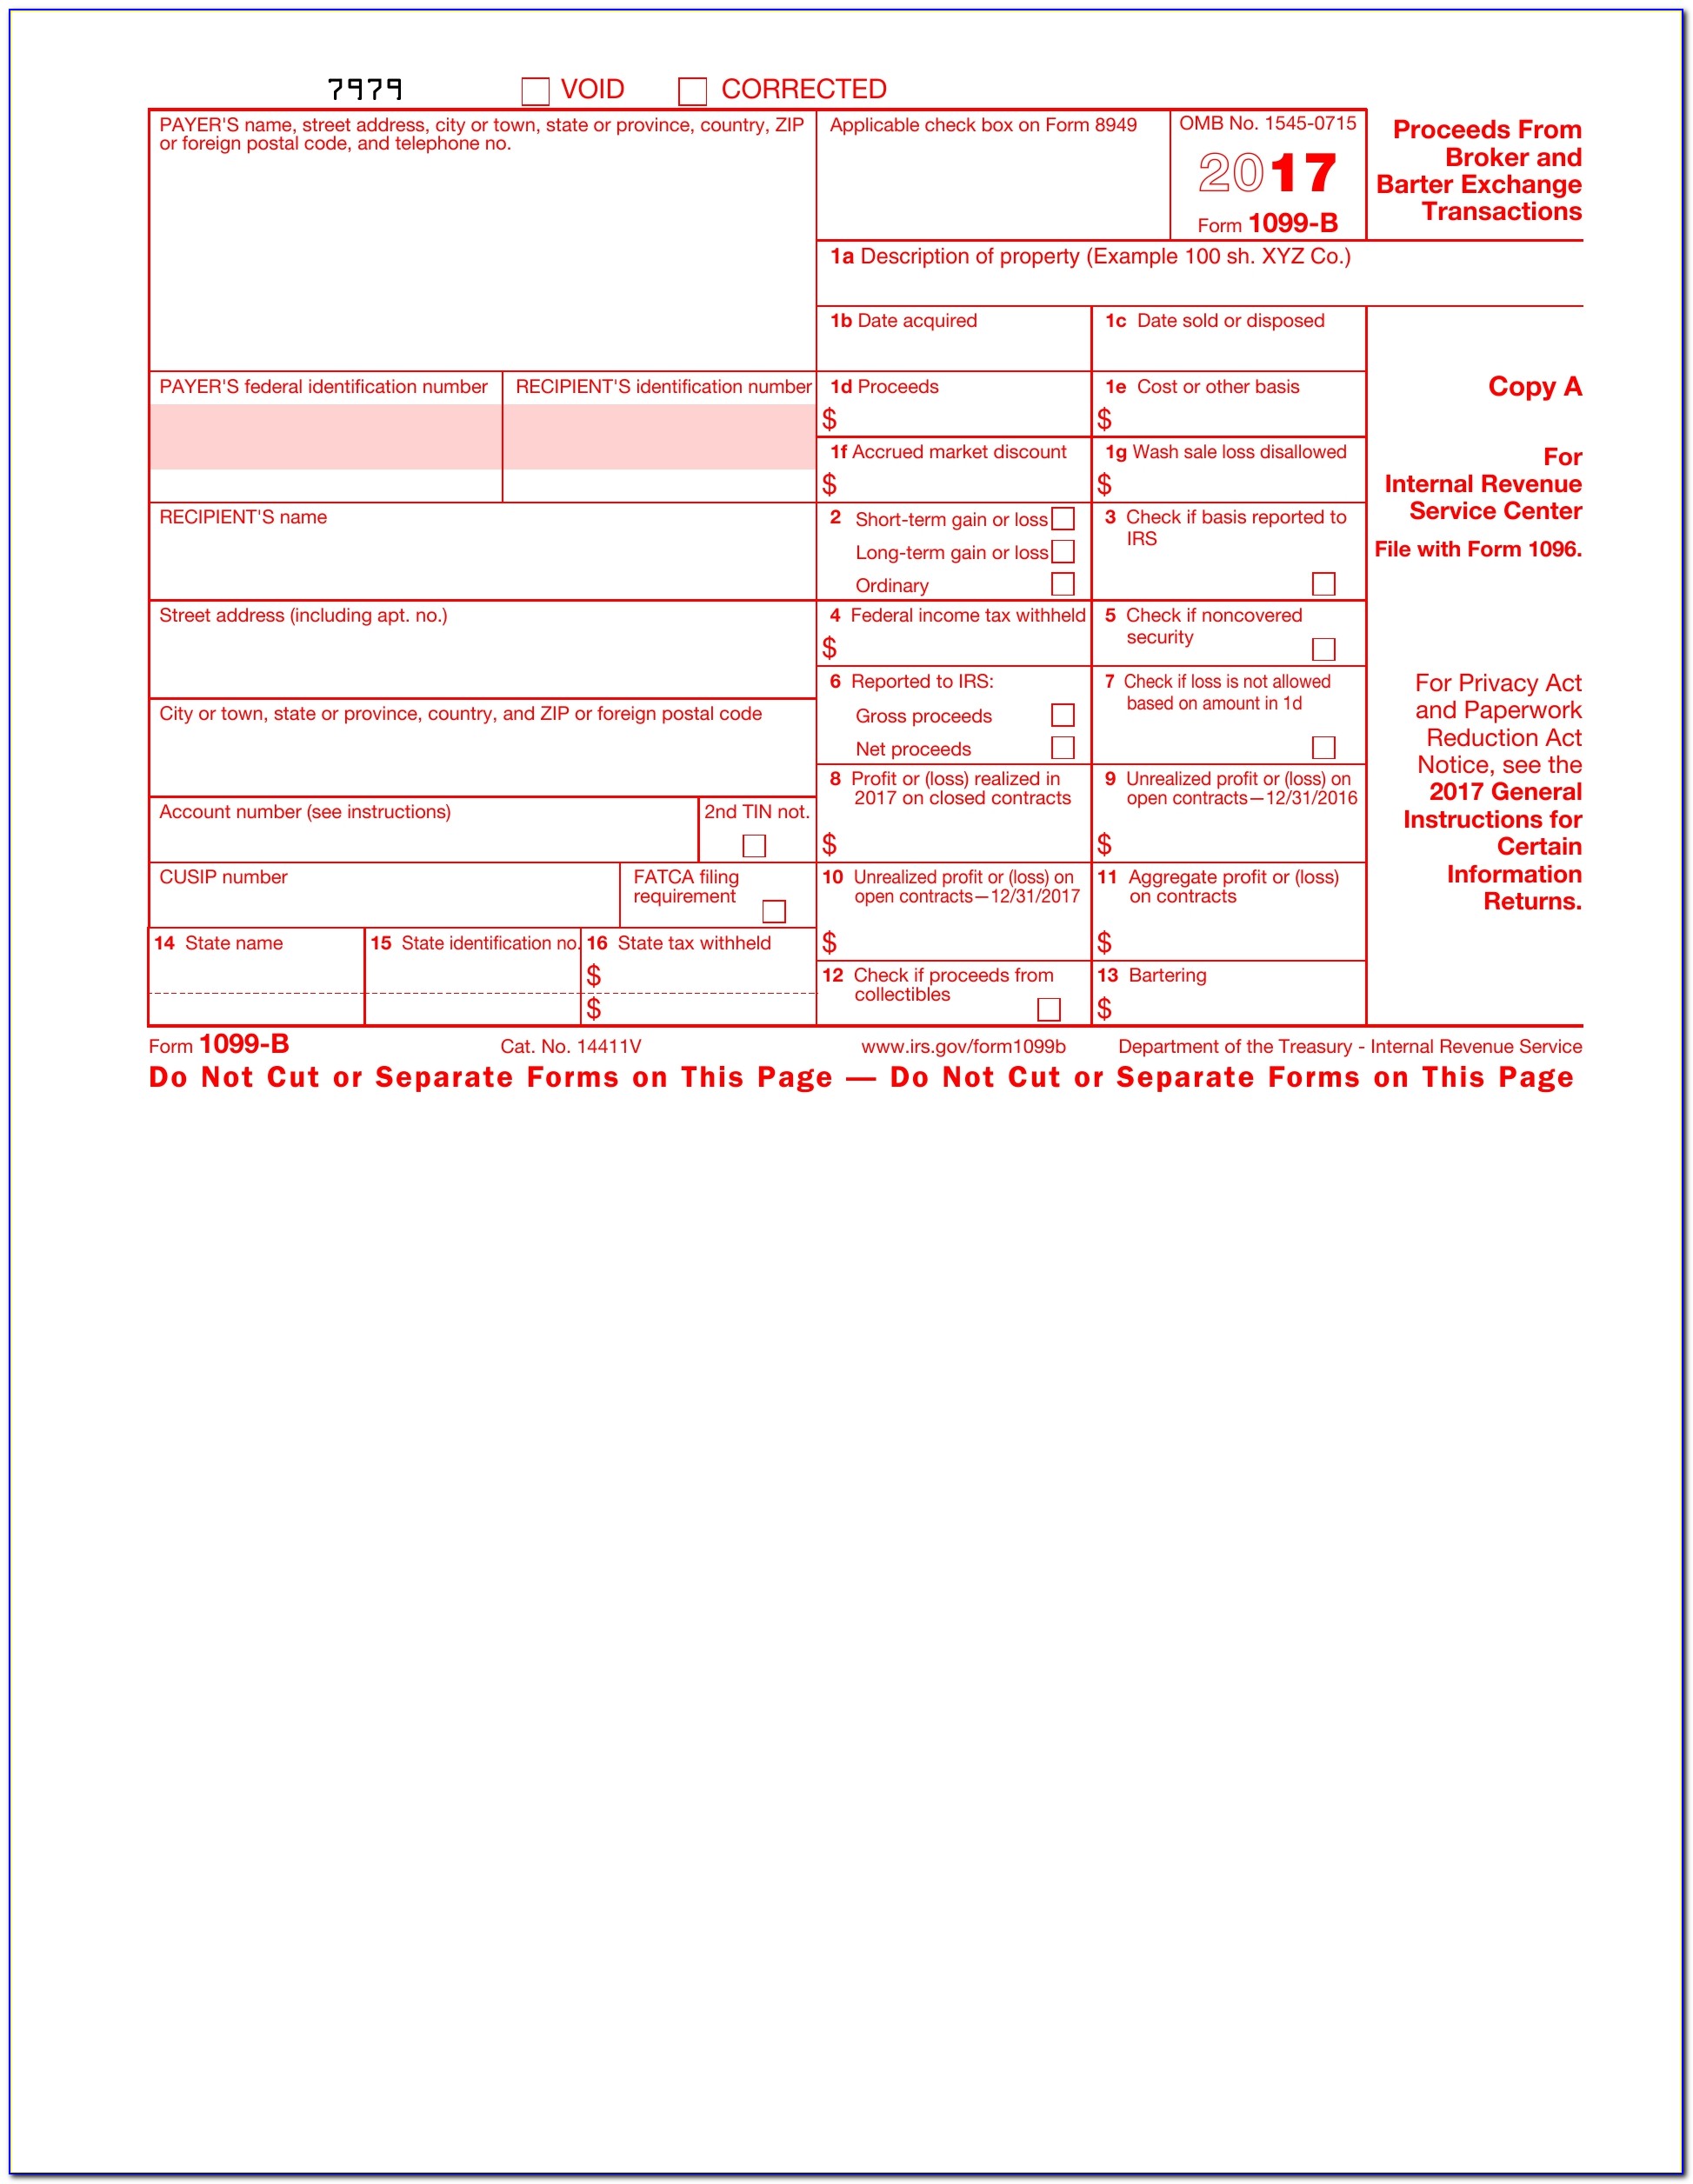 Irs 1096 Forms Free